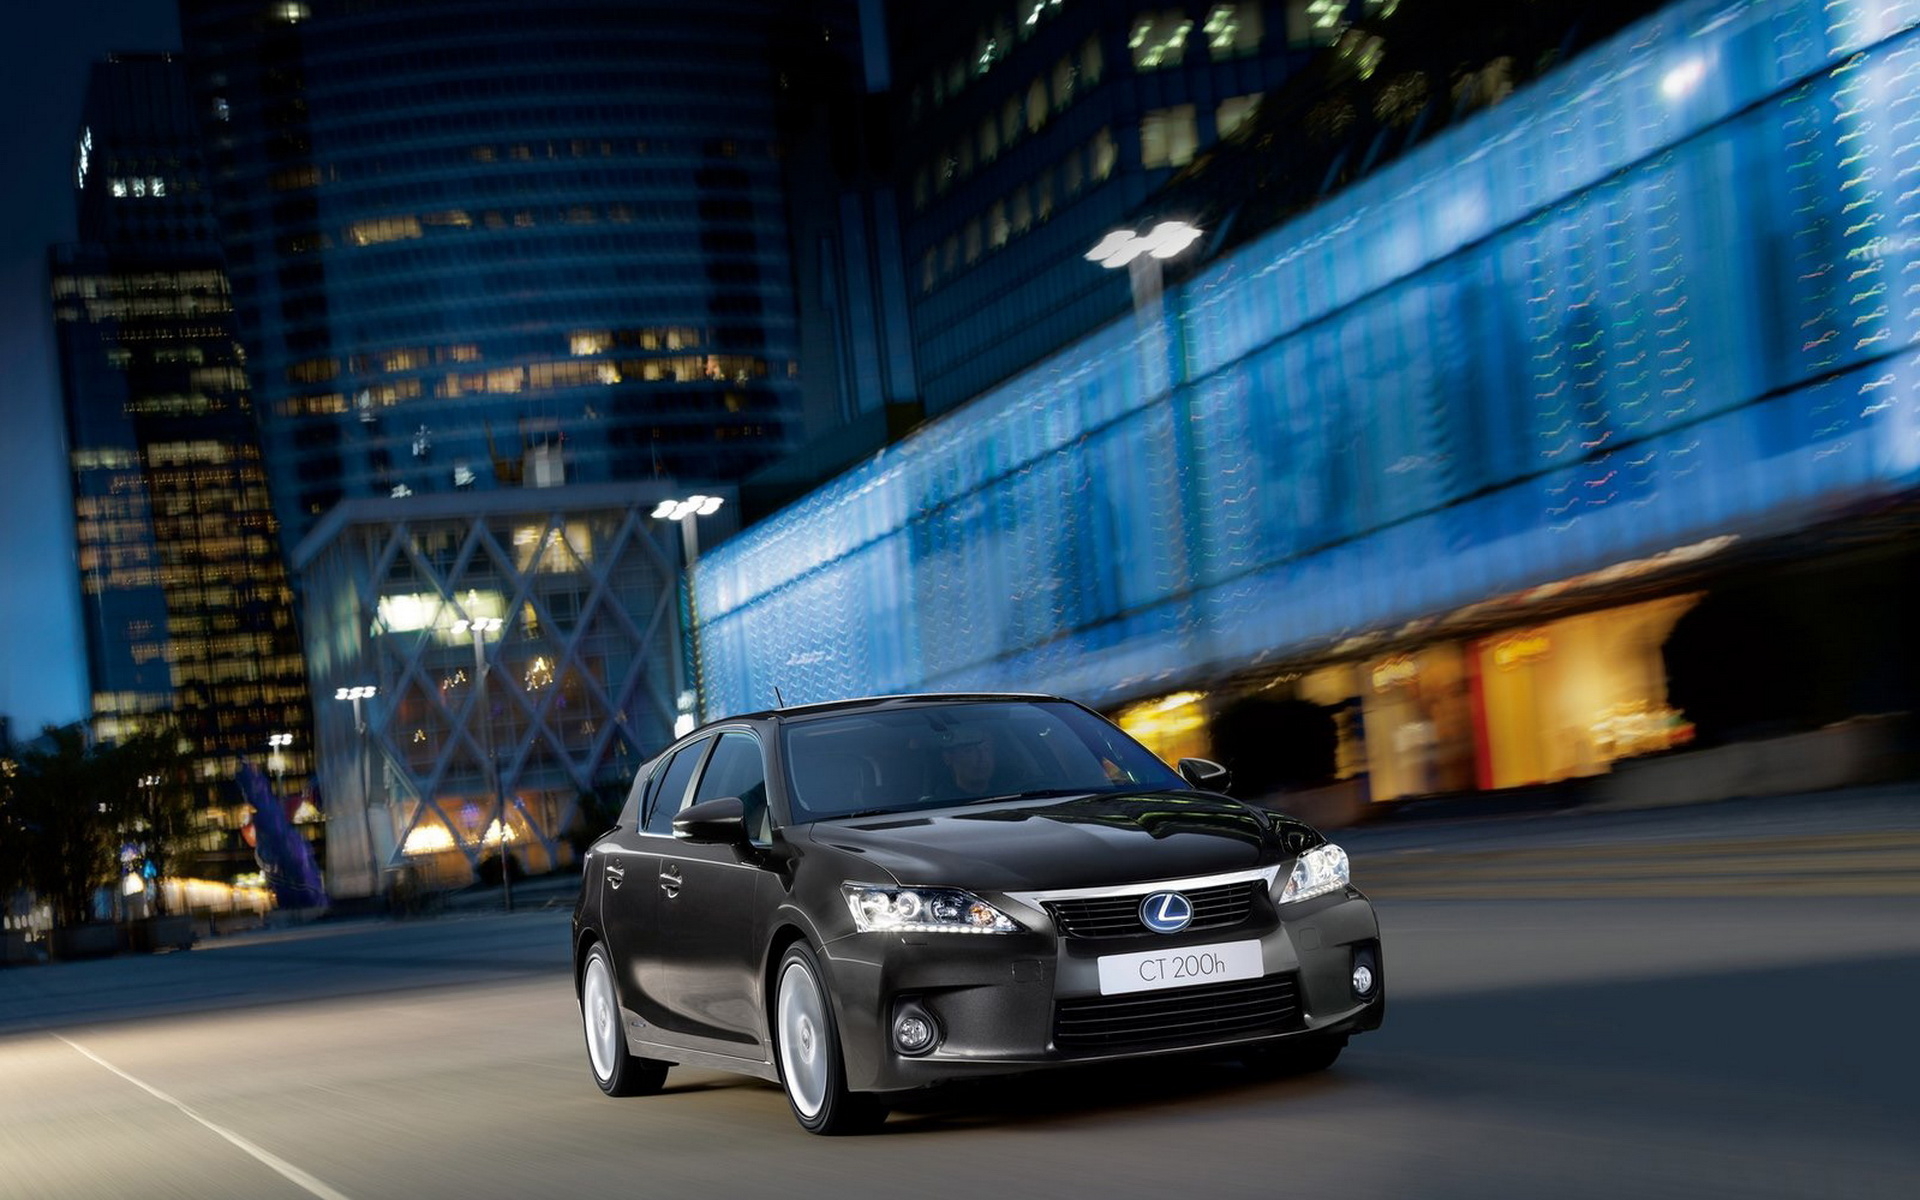 New Lexus Ct 200h Wallpapers And Images Wallpapers Pictures Photos